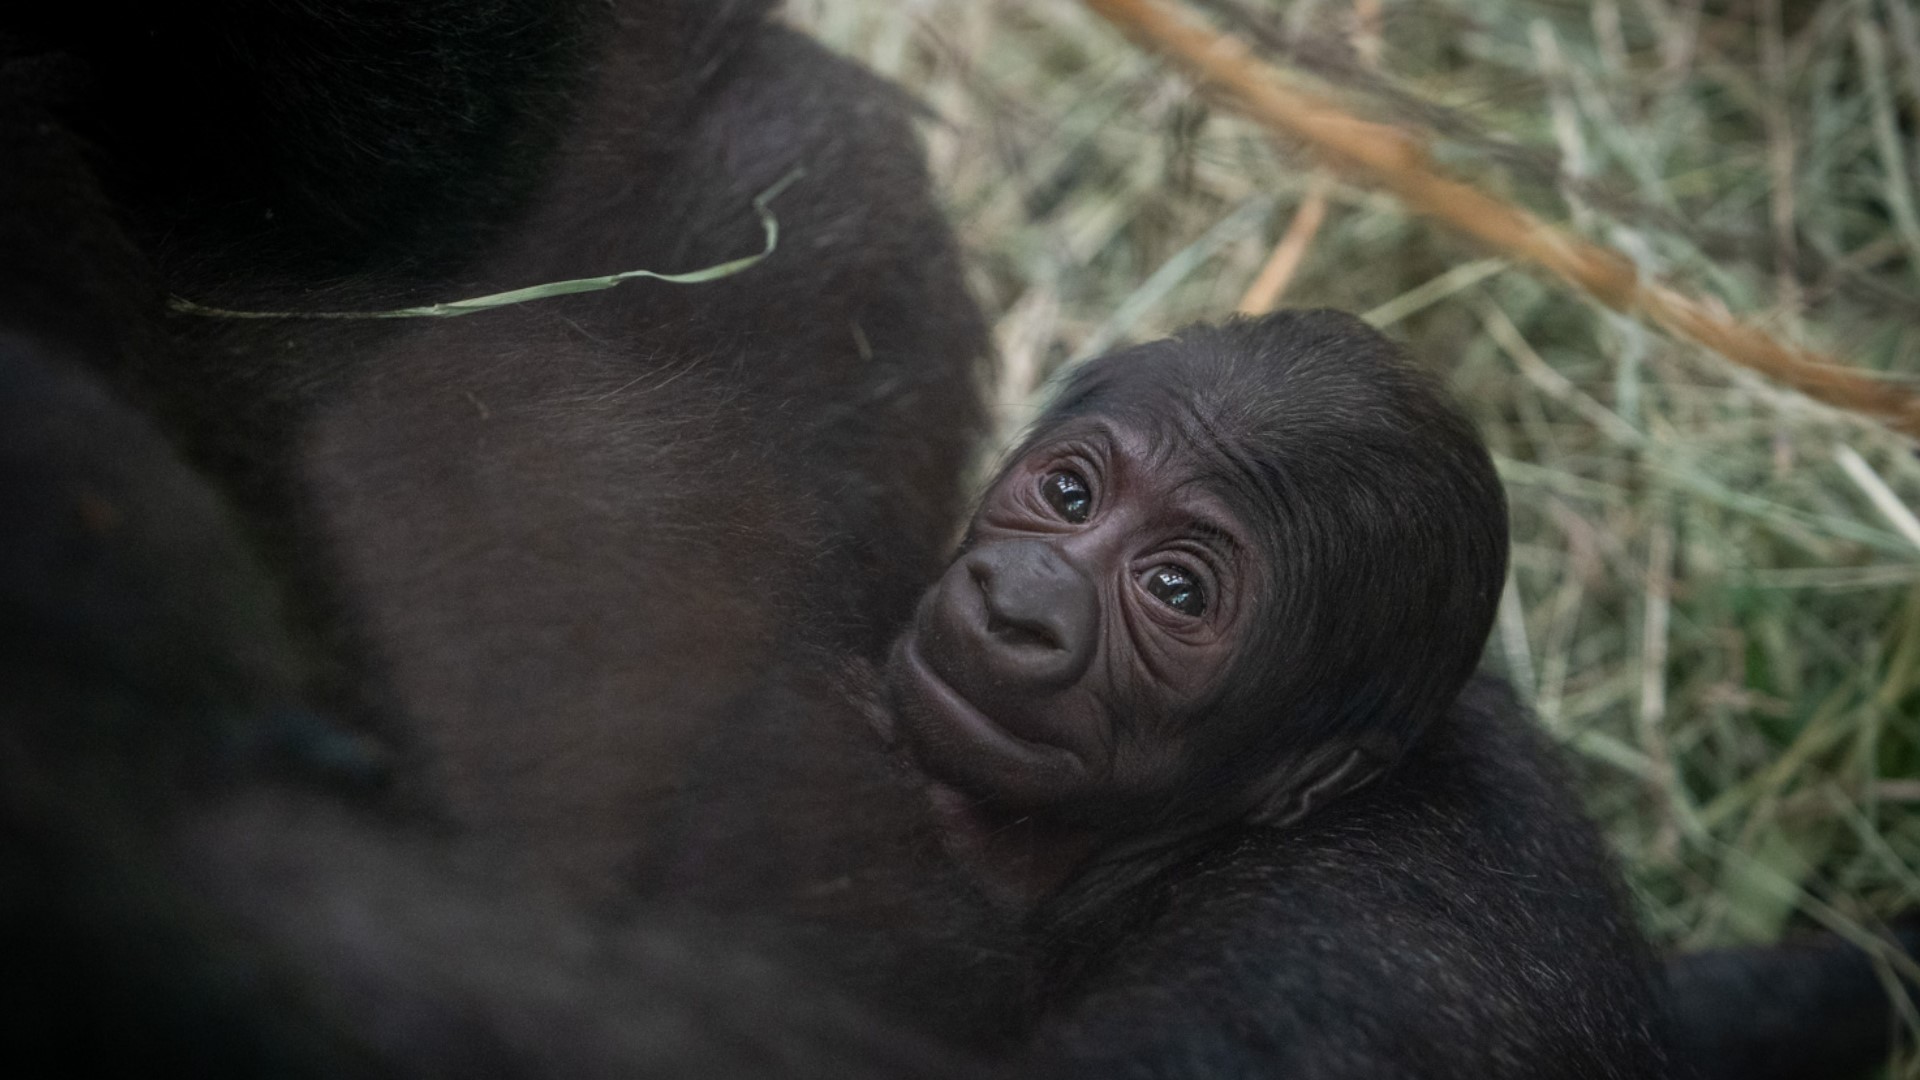 According to the zoo's Facebook, the new mother of the infant was believed to be a male gorilla before this surprise birth.